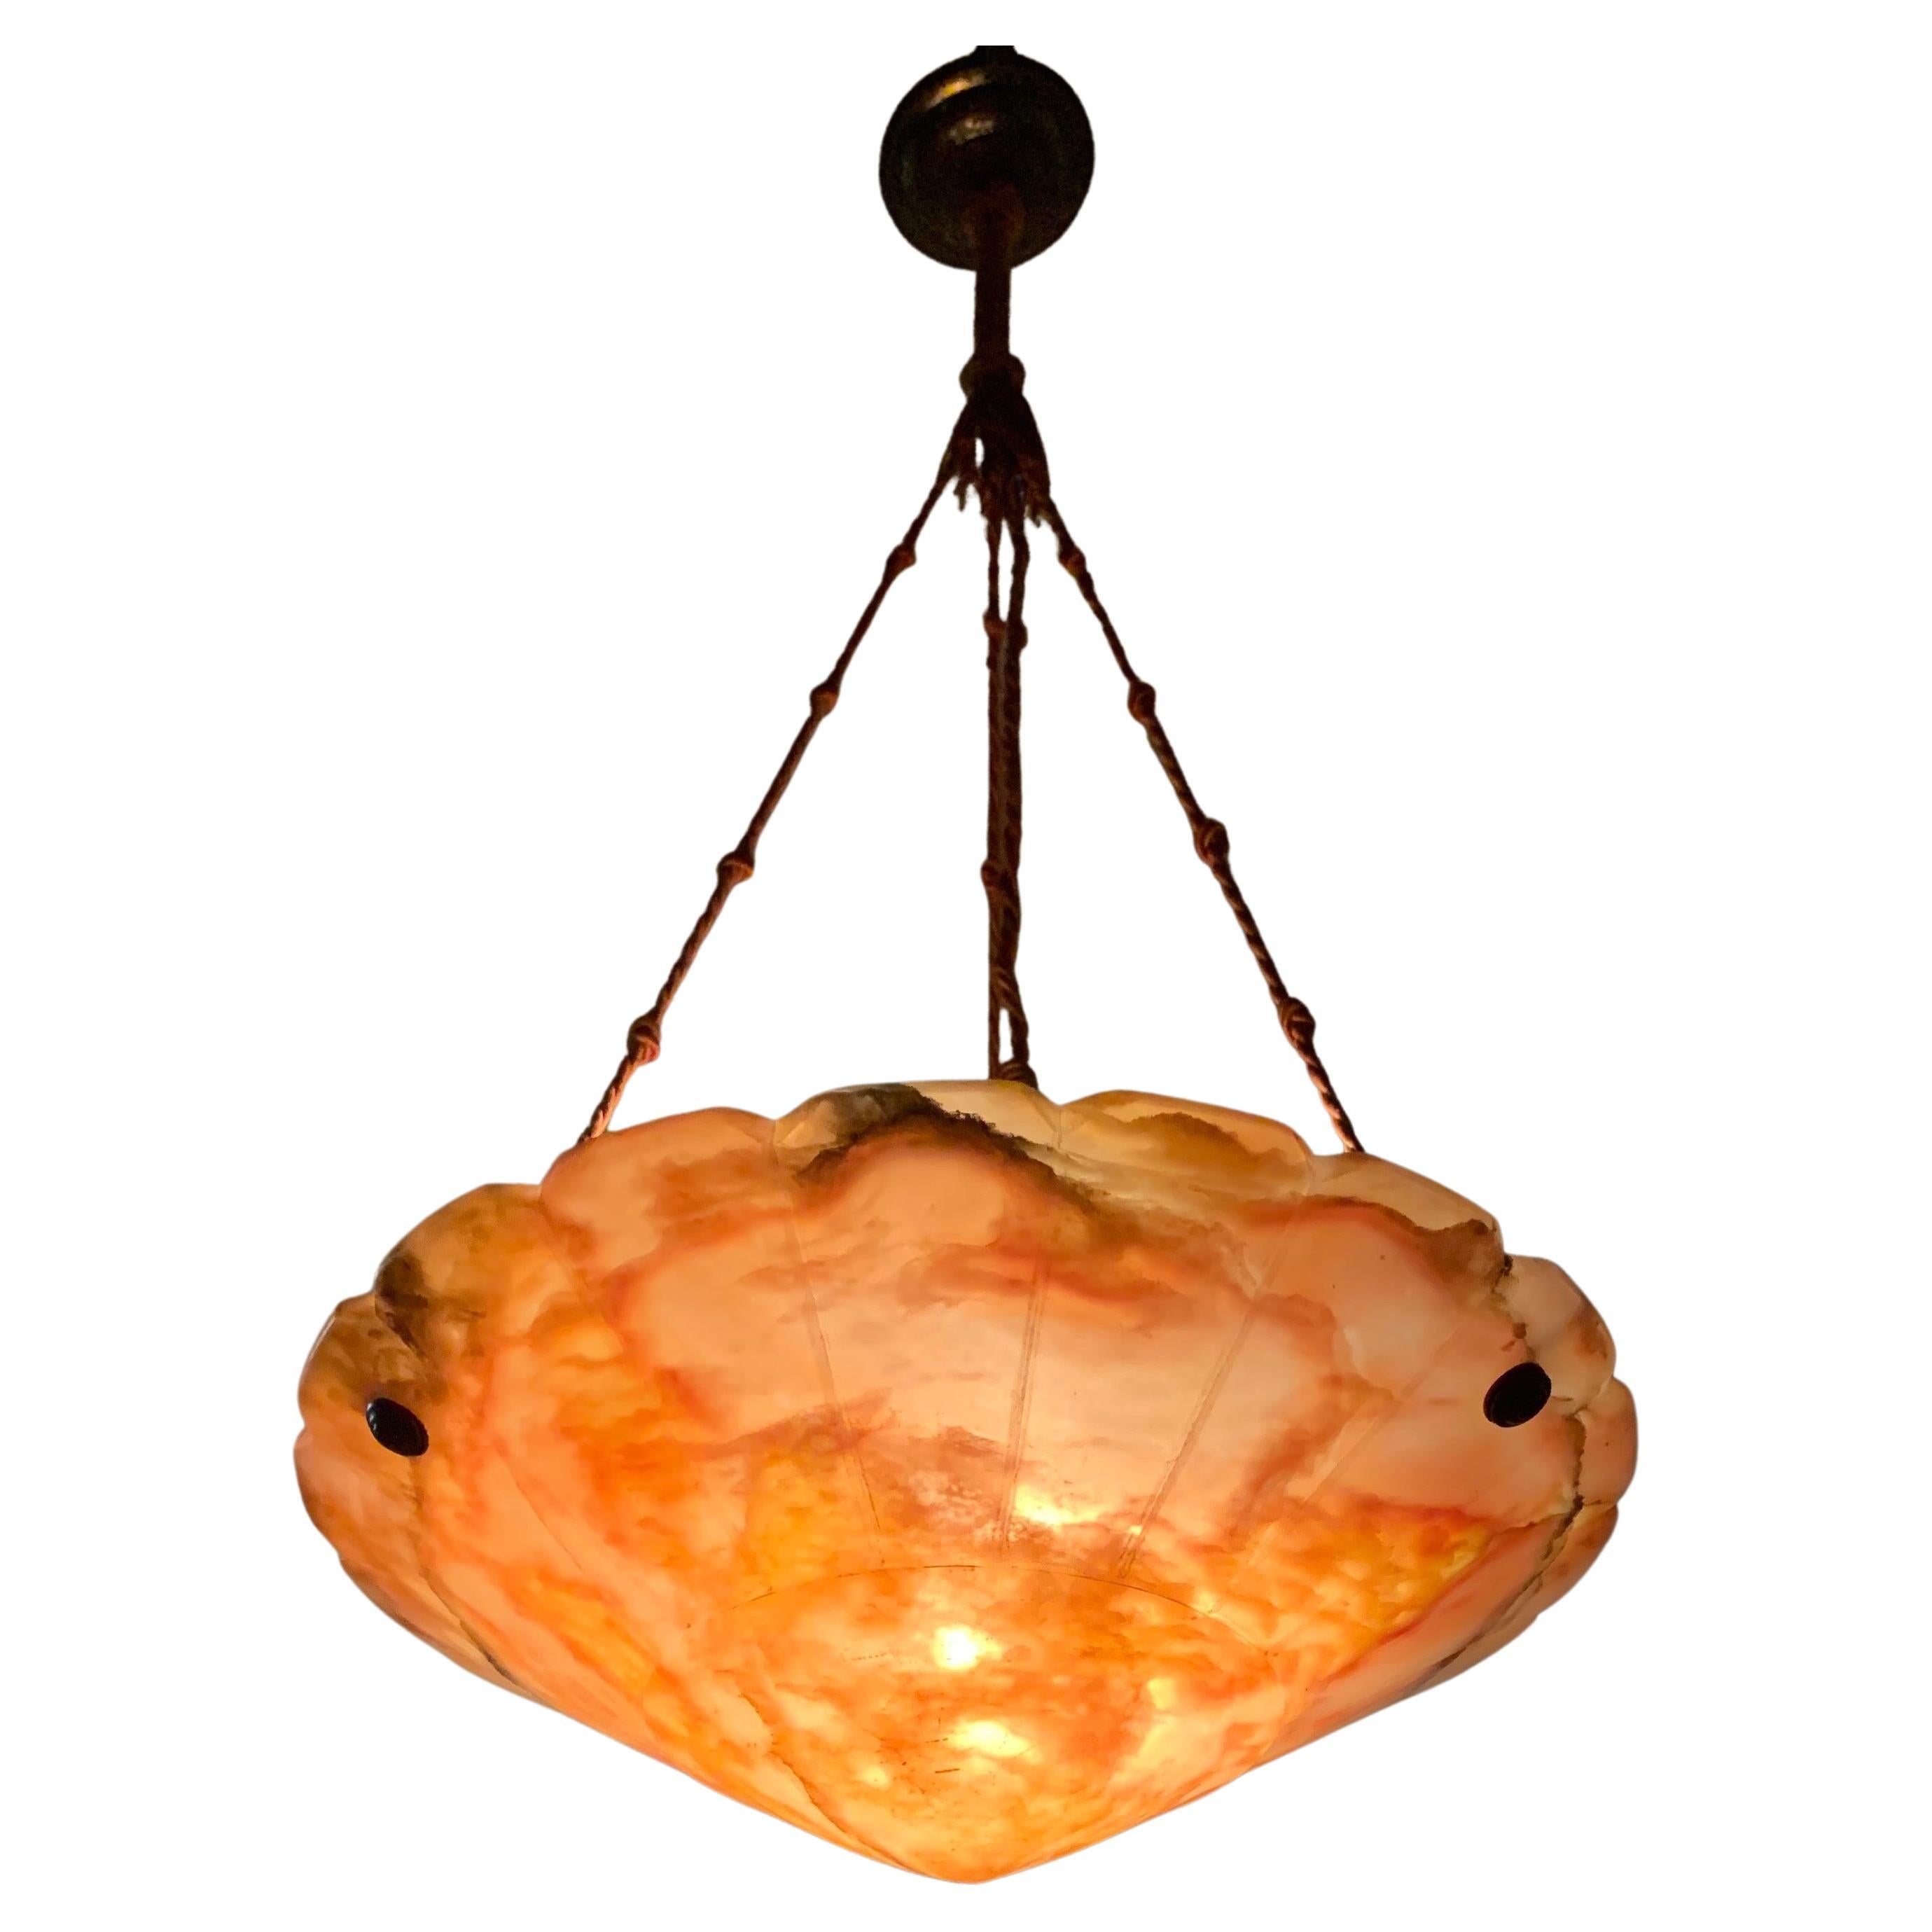 Stunning and geometrically designed Art Deco pendant light.

With early 20th century lighting as one of our specialties, we were thrilled to find another rare and truly beautiful Art Deco pendant, made of the most striking alabaster imaginable. This